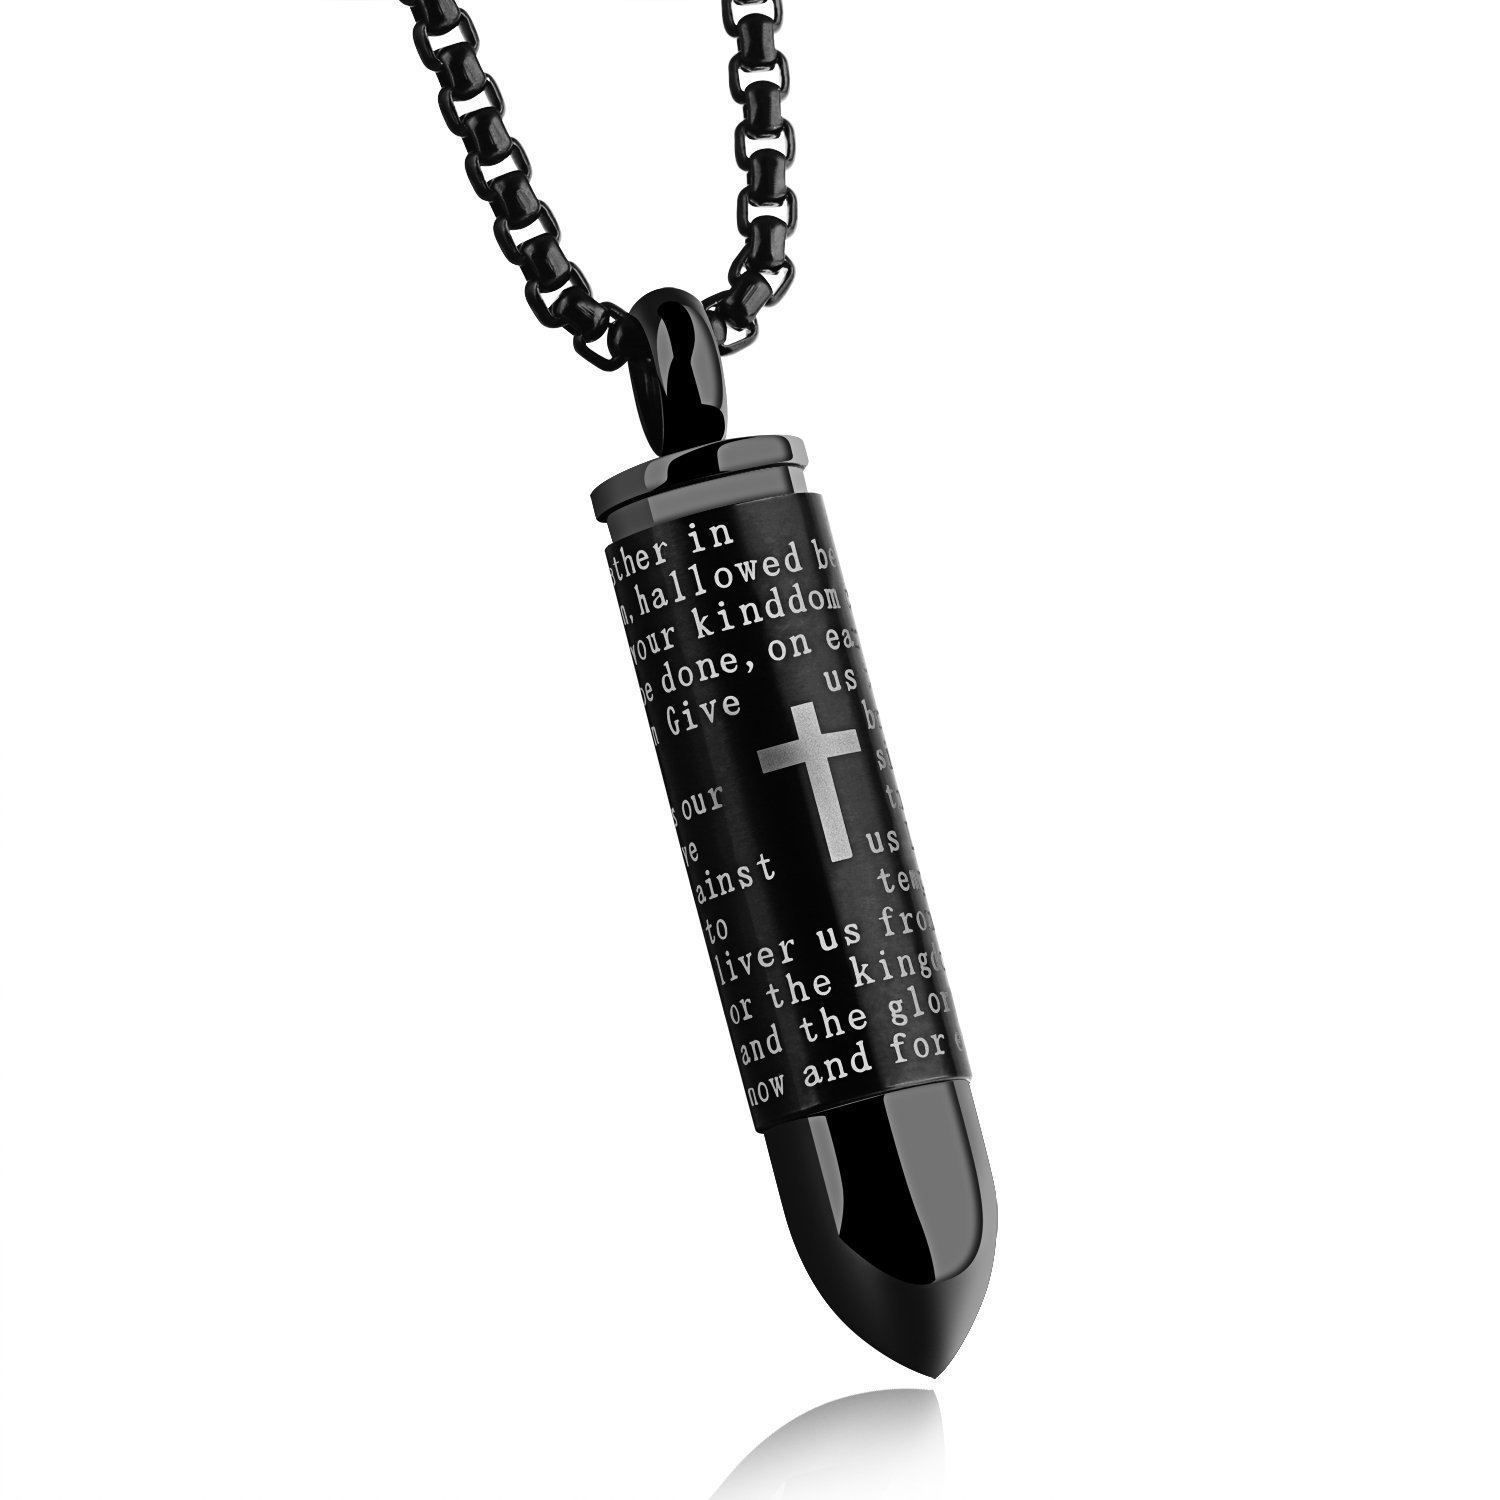 Stainless Steel English Lord's Prayer Cross Detachable Cremation Urn Bullet Pendant Necklace with 22 Inch Chain (Black Gold Silver Blue)